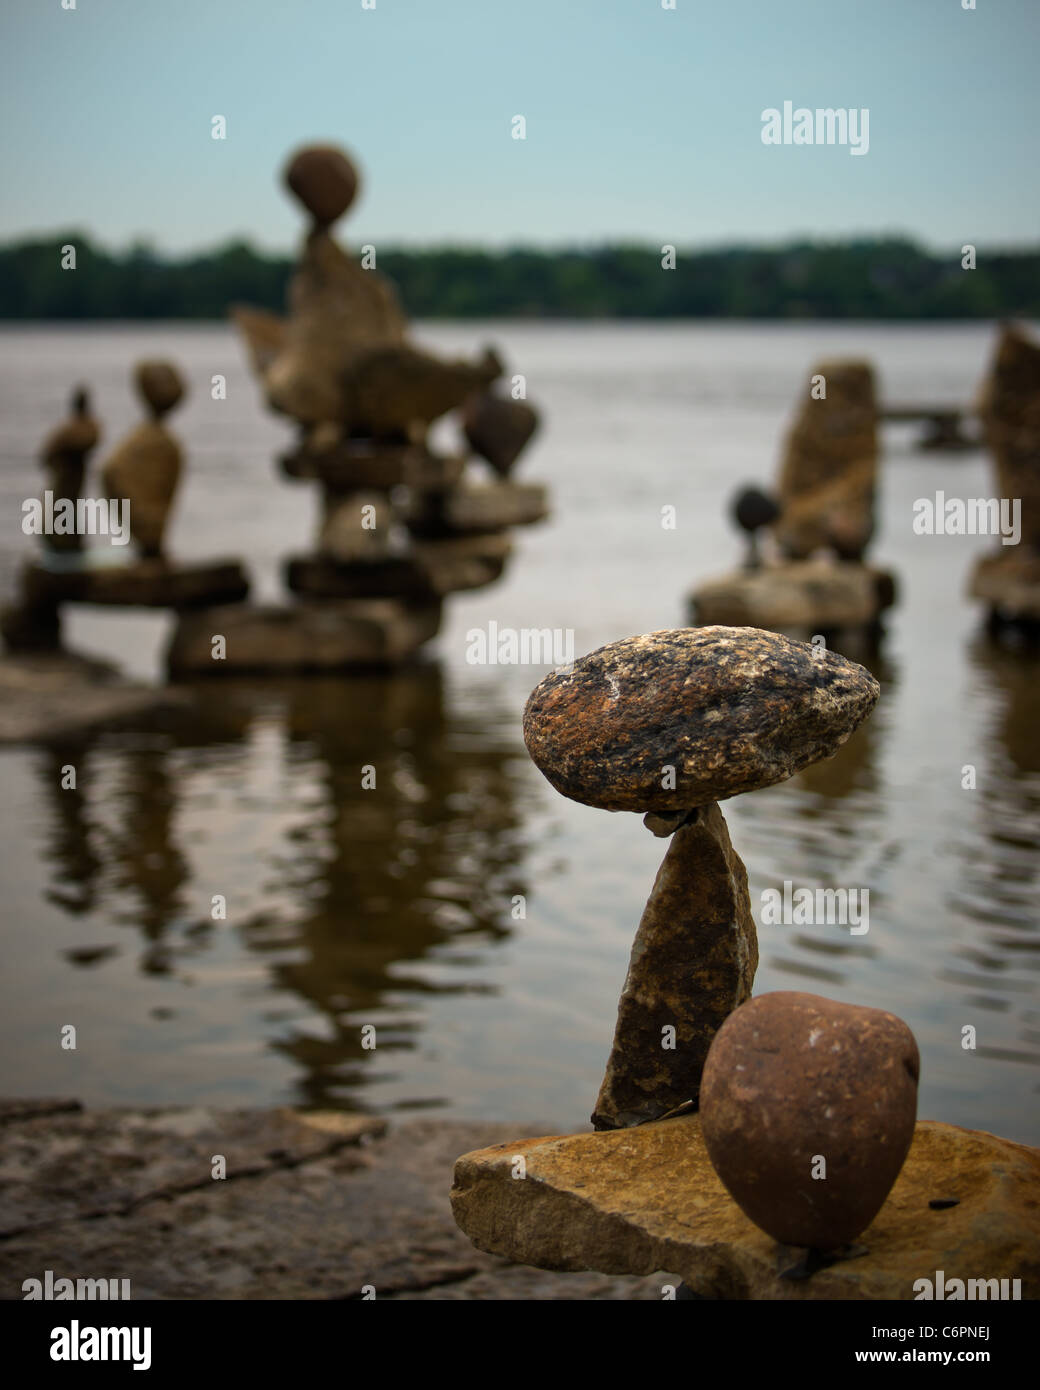 A small Inuksuk (inukshuk) stands in the foreground with many more out of foucs in the background. Stock Photo